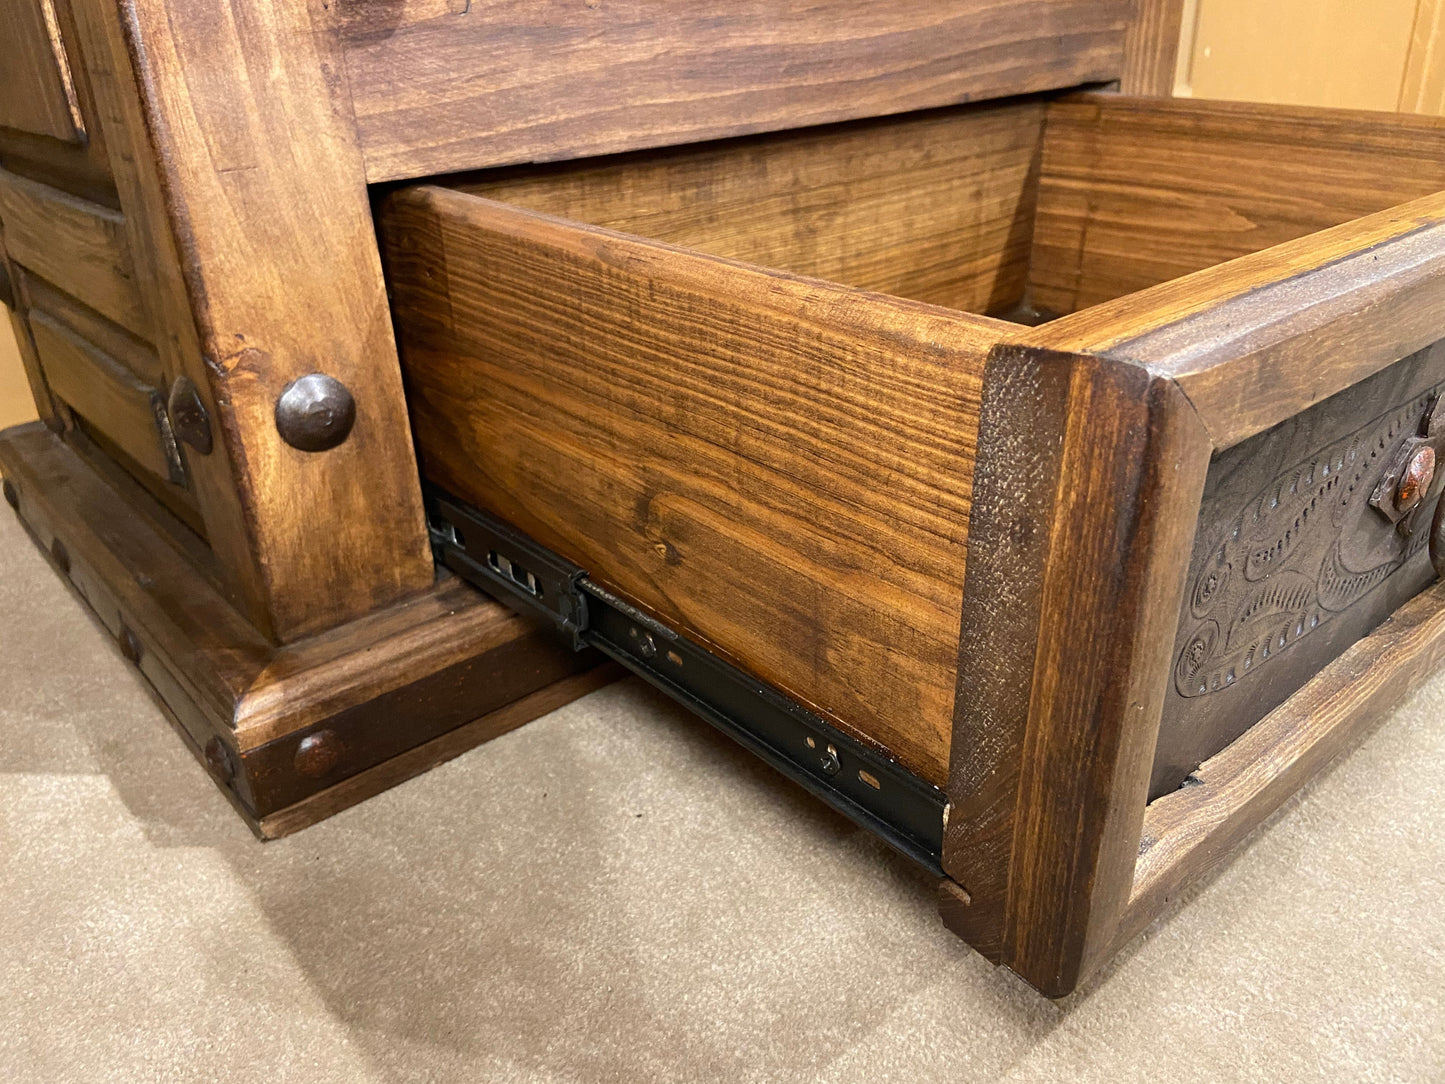 Side angle of drawer showing hardware used for soft closing drawer